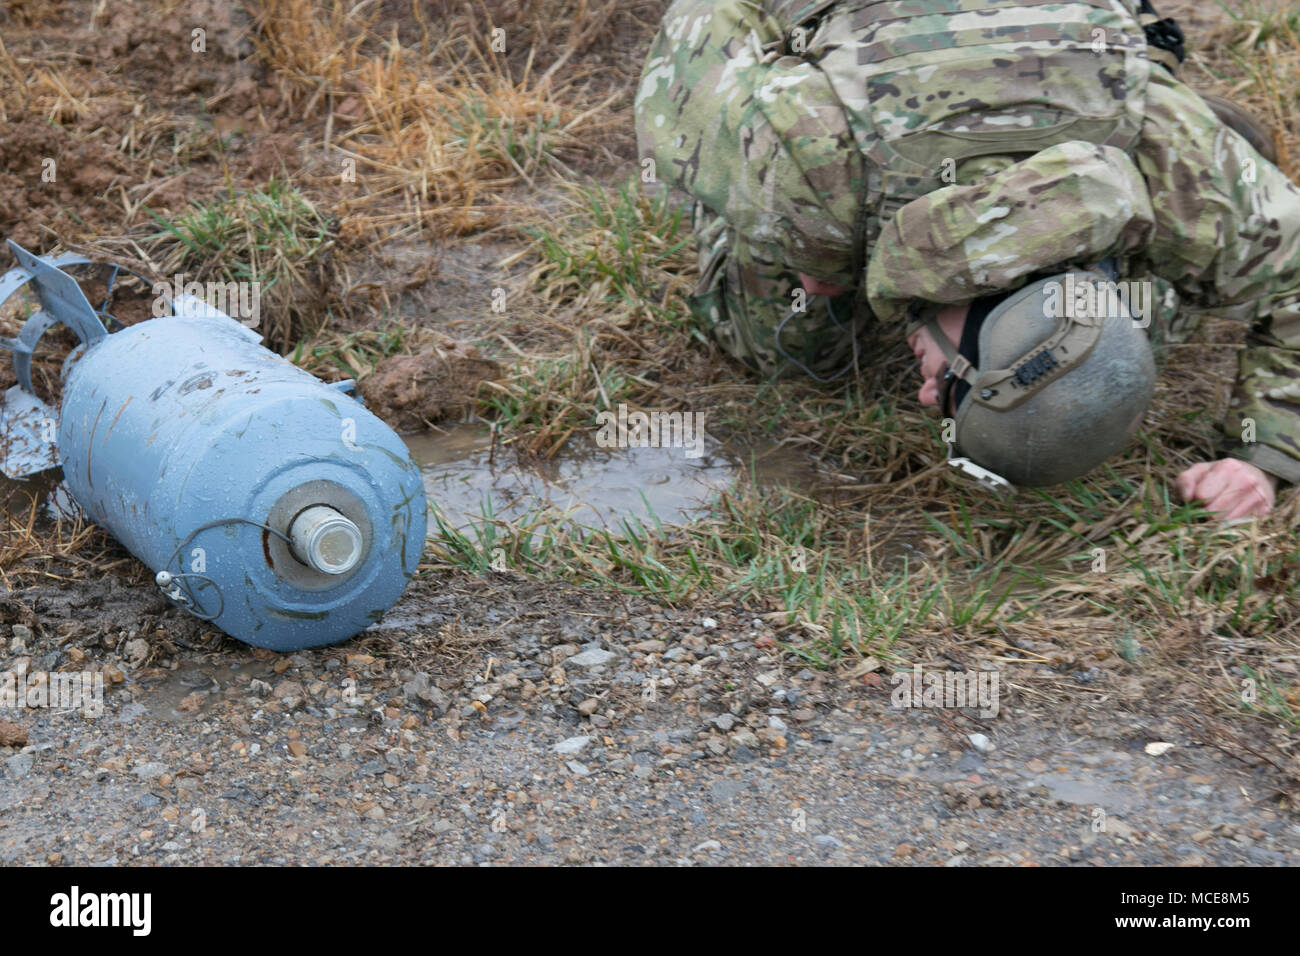 Sgt. Josh Wilson, an explosive ordnance disposal team leader with 49th Ordnance Company (Explosive Ordnance Disposal), 184th Ordnance Battalion (EOD), 52nd Ordnance Group (EOD), 20th Chemical, Biological, Radiological, Nuclear and high-yield Explosive Command, examines a simulated round for additional triggers on the training areas of Fort Campbell, Ky., Feb. 22, 2018. This simulation was part of multi-echelon training exercise for the group and included a validation exercise for the company for its upcoming deployment to Southwest Asia. (U.S. Army photo by Staff Sgt. Adam Hinman) Stock Photo